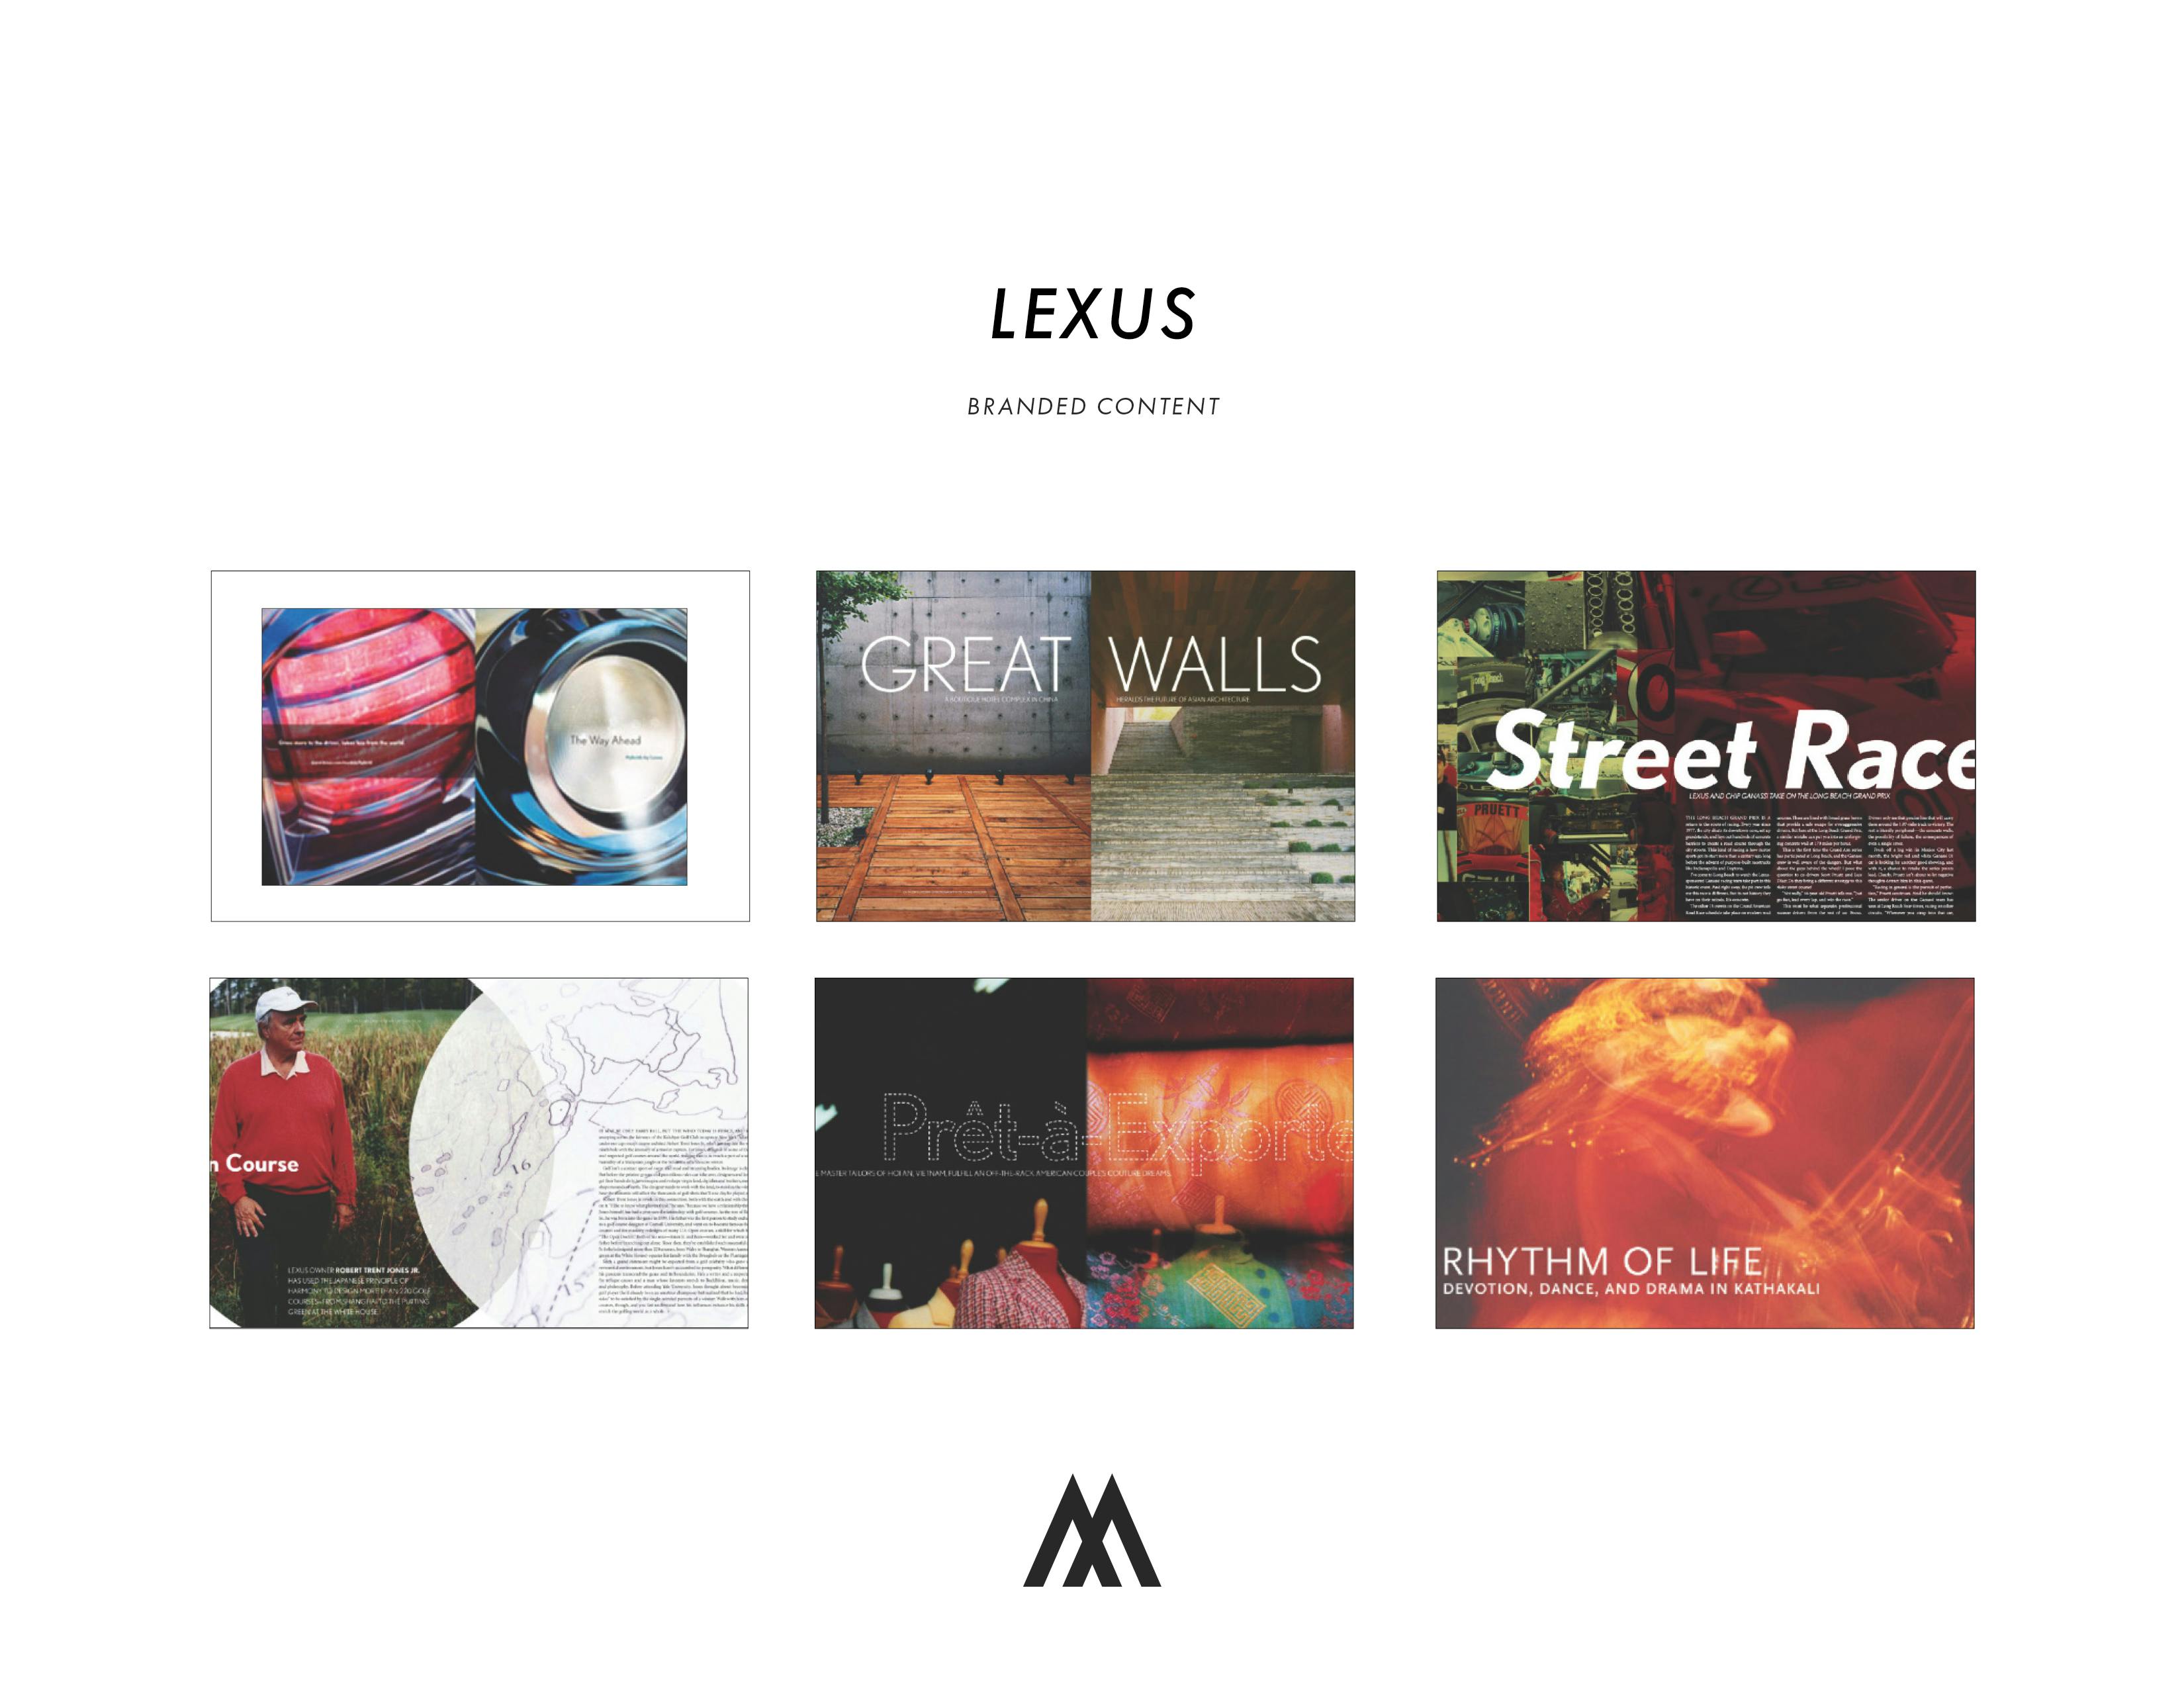 Examples of branded content for Lexus